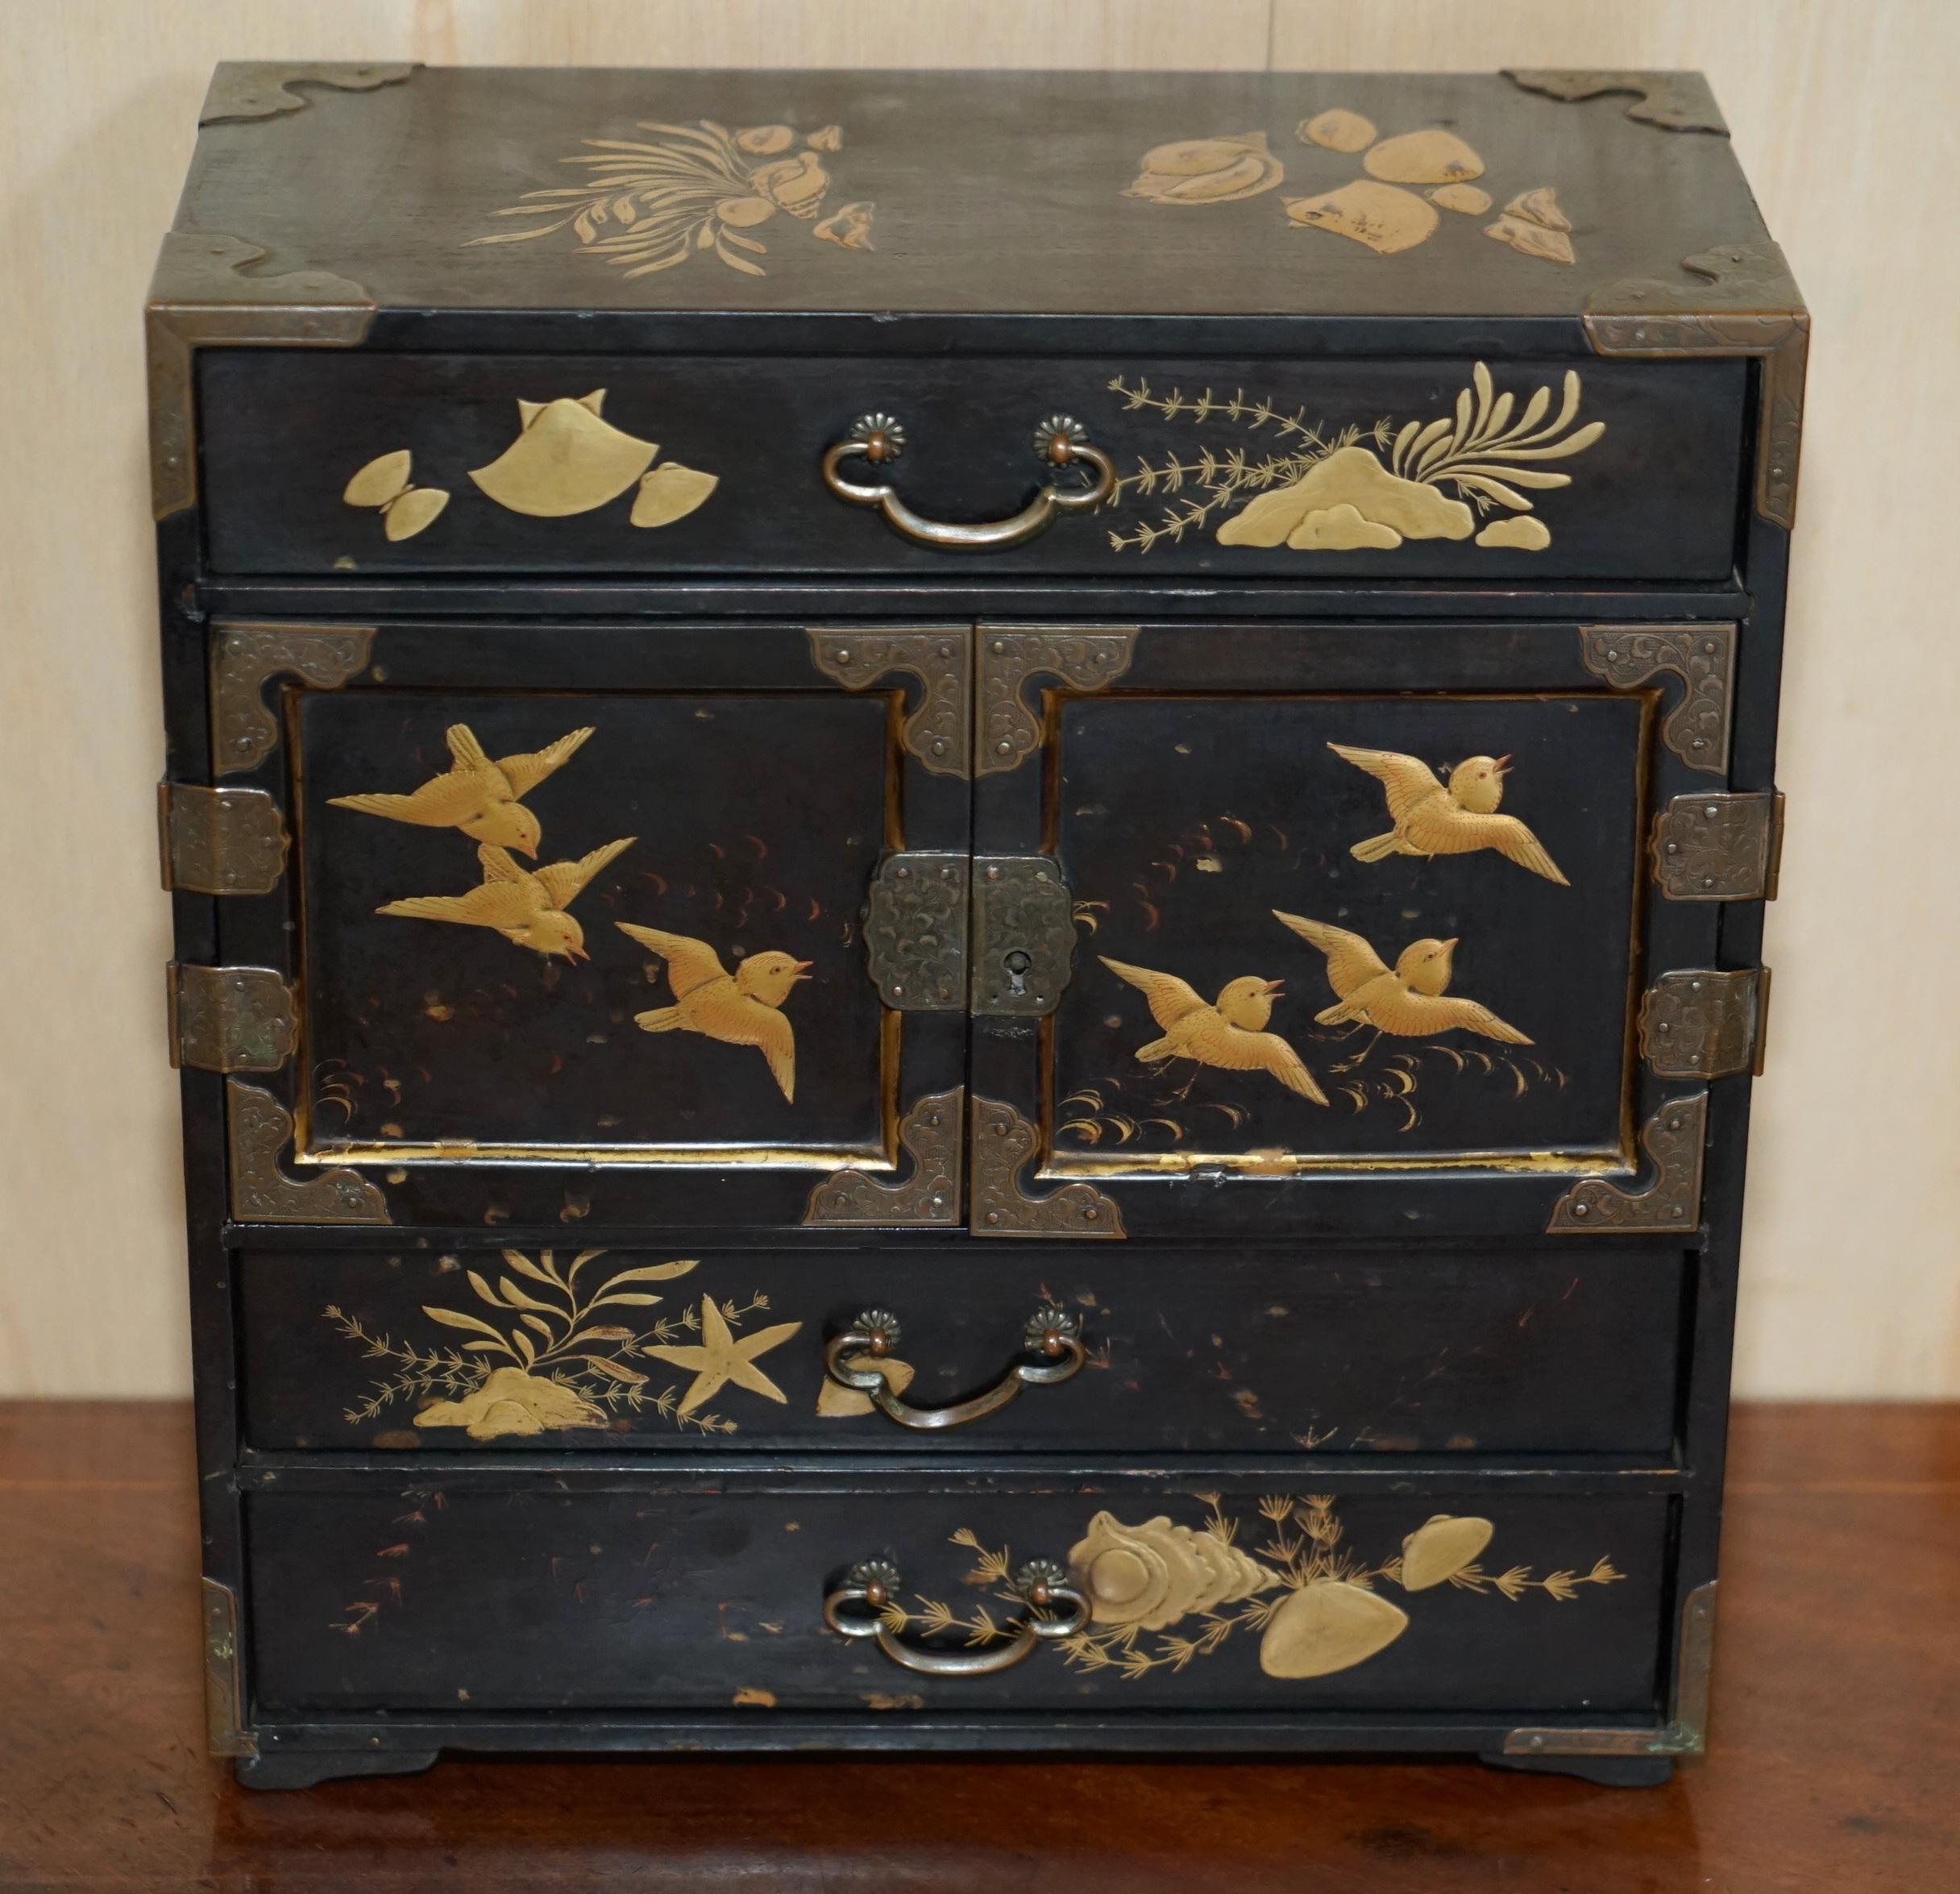 We are delighted to offer for sale this lovely vintage circa 1920's hand painted and lacquered oriental Chinese table chest or jewellery box.

A very good looking and well made piece, it is very decorative and can be used for storing anything you